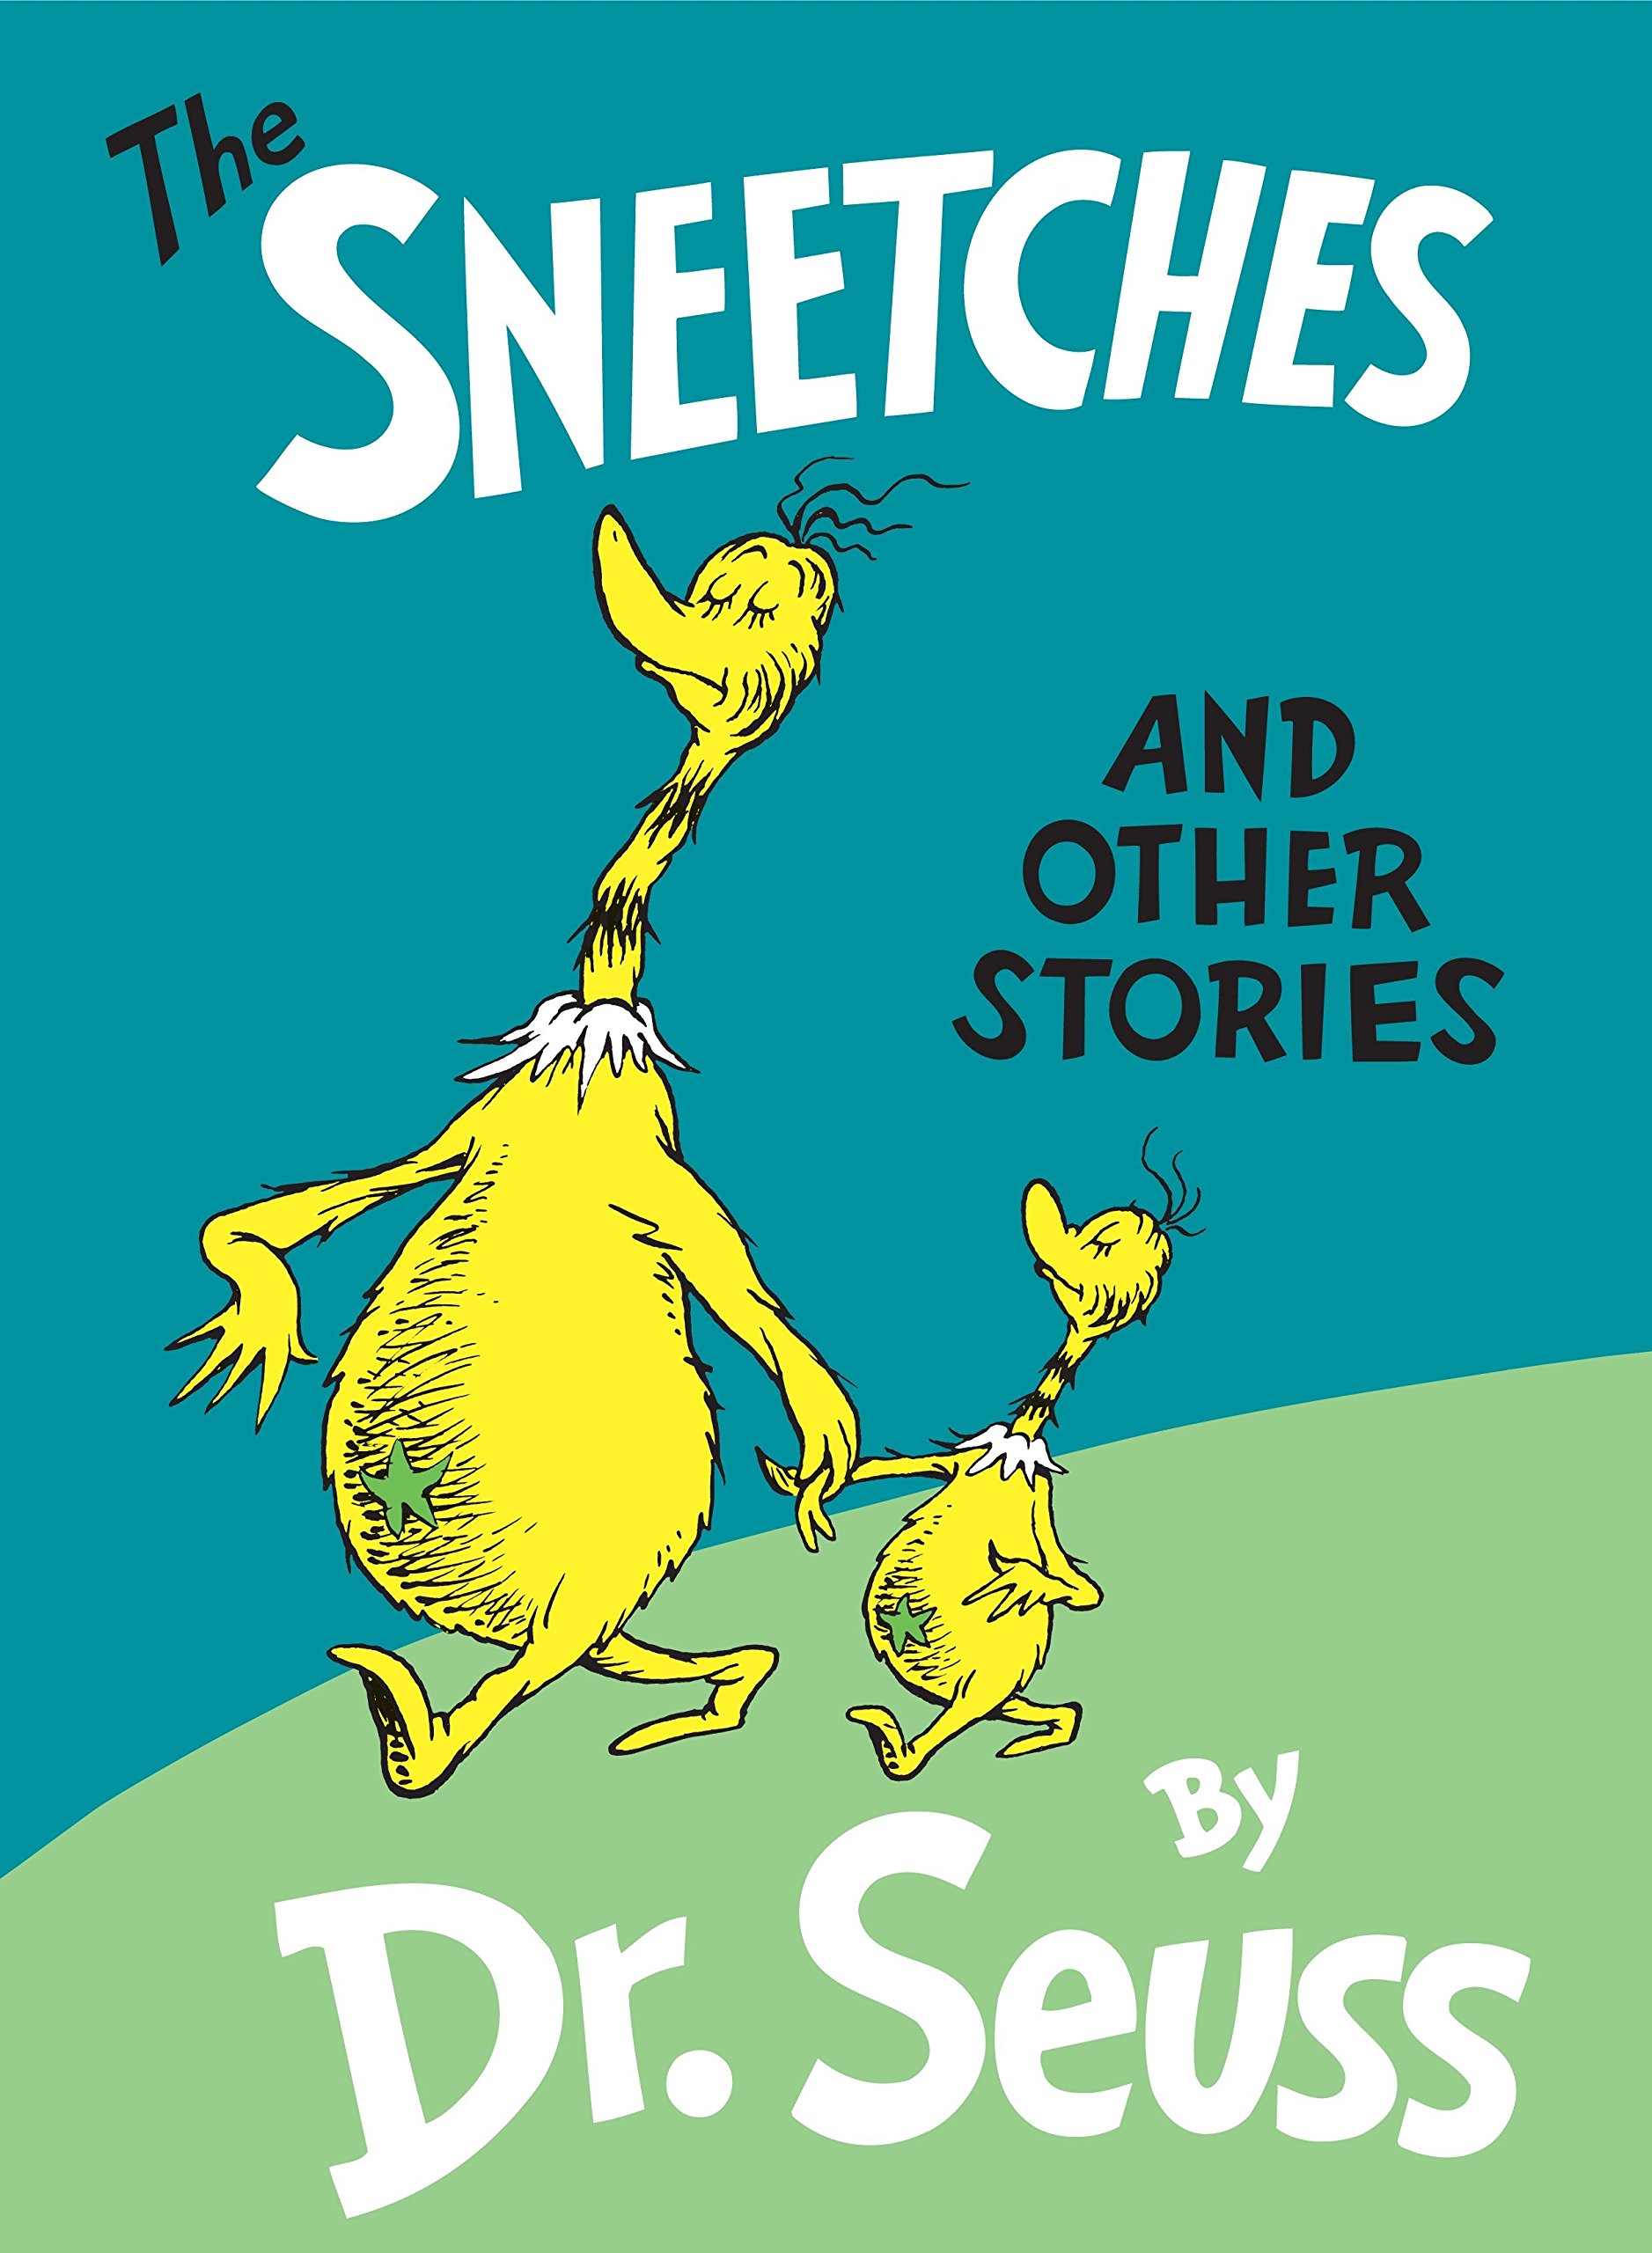 Lessons About Diversity Taught by The Sneetches